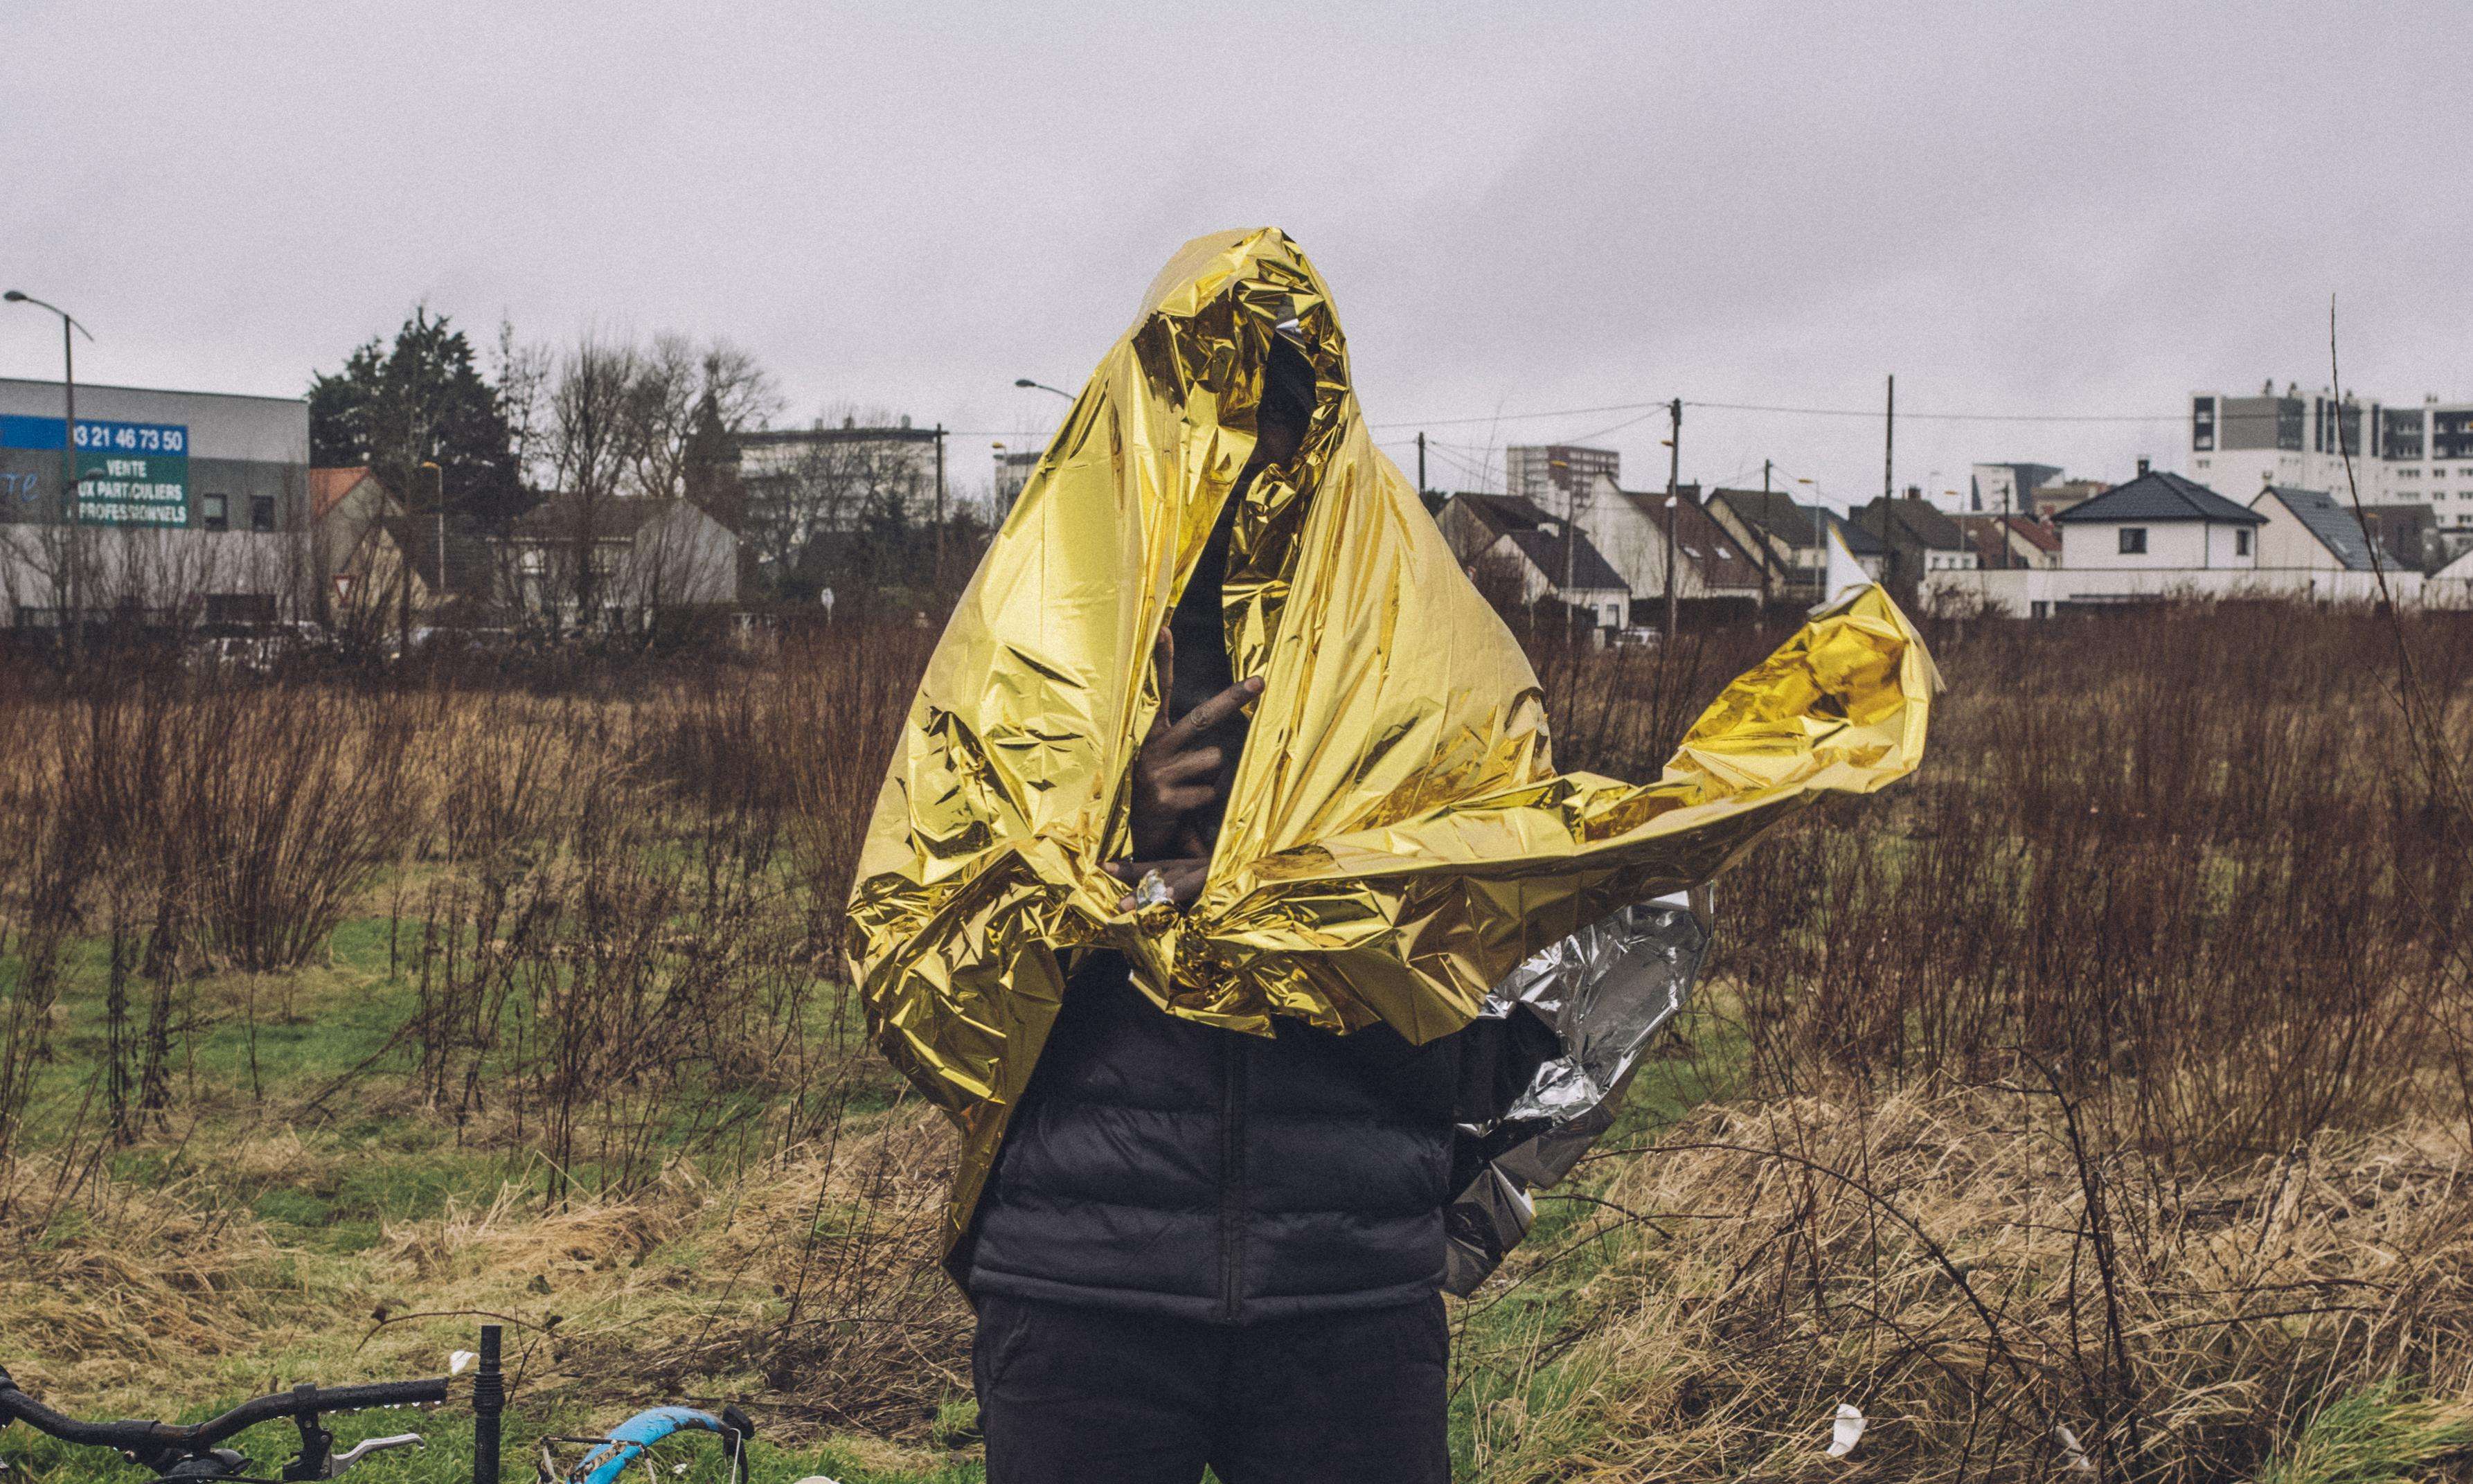 A young migrant covers himself with a survival blanket on a rainy day in Calais.